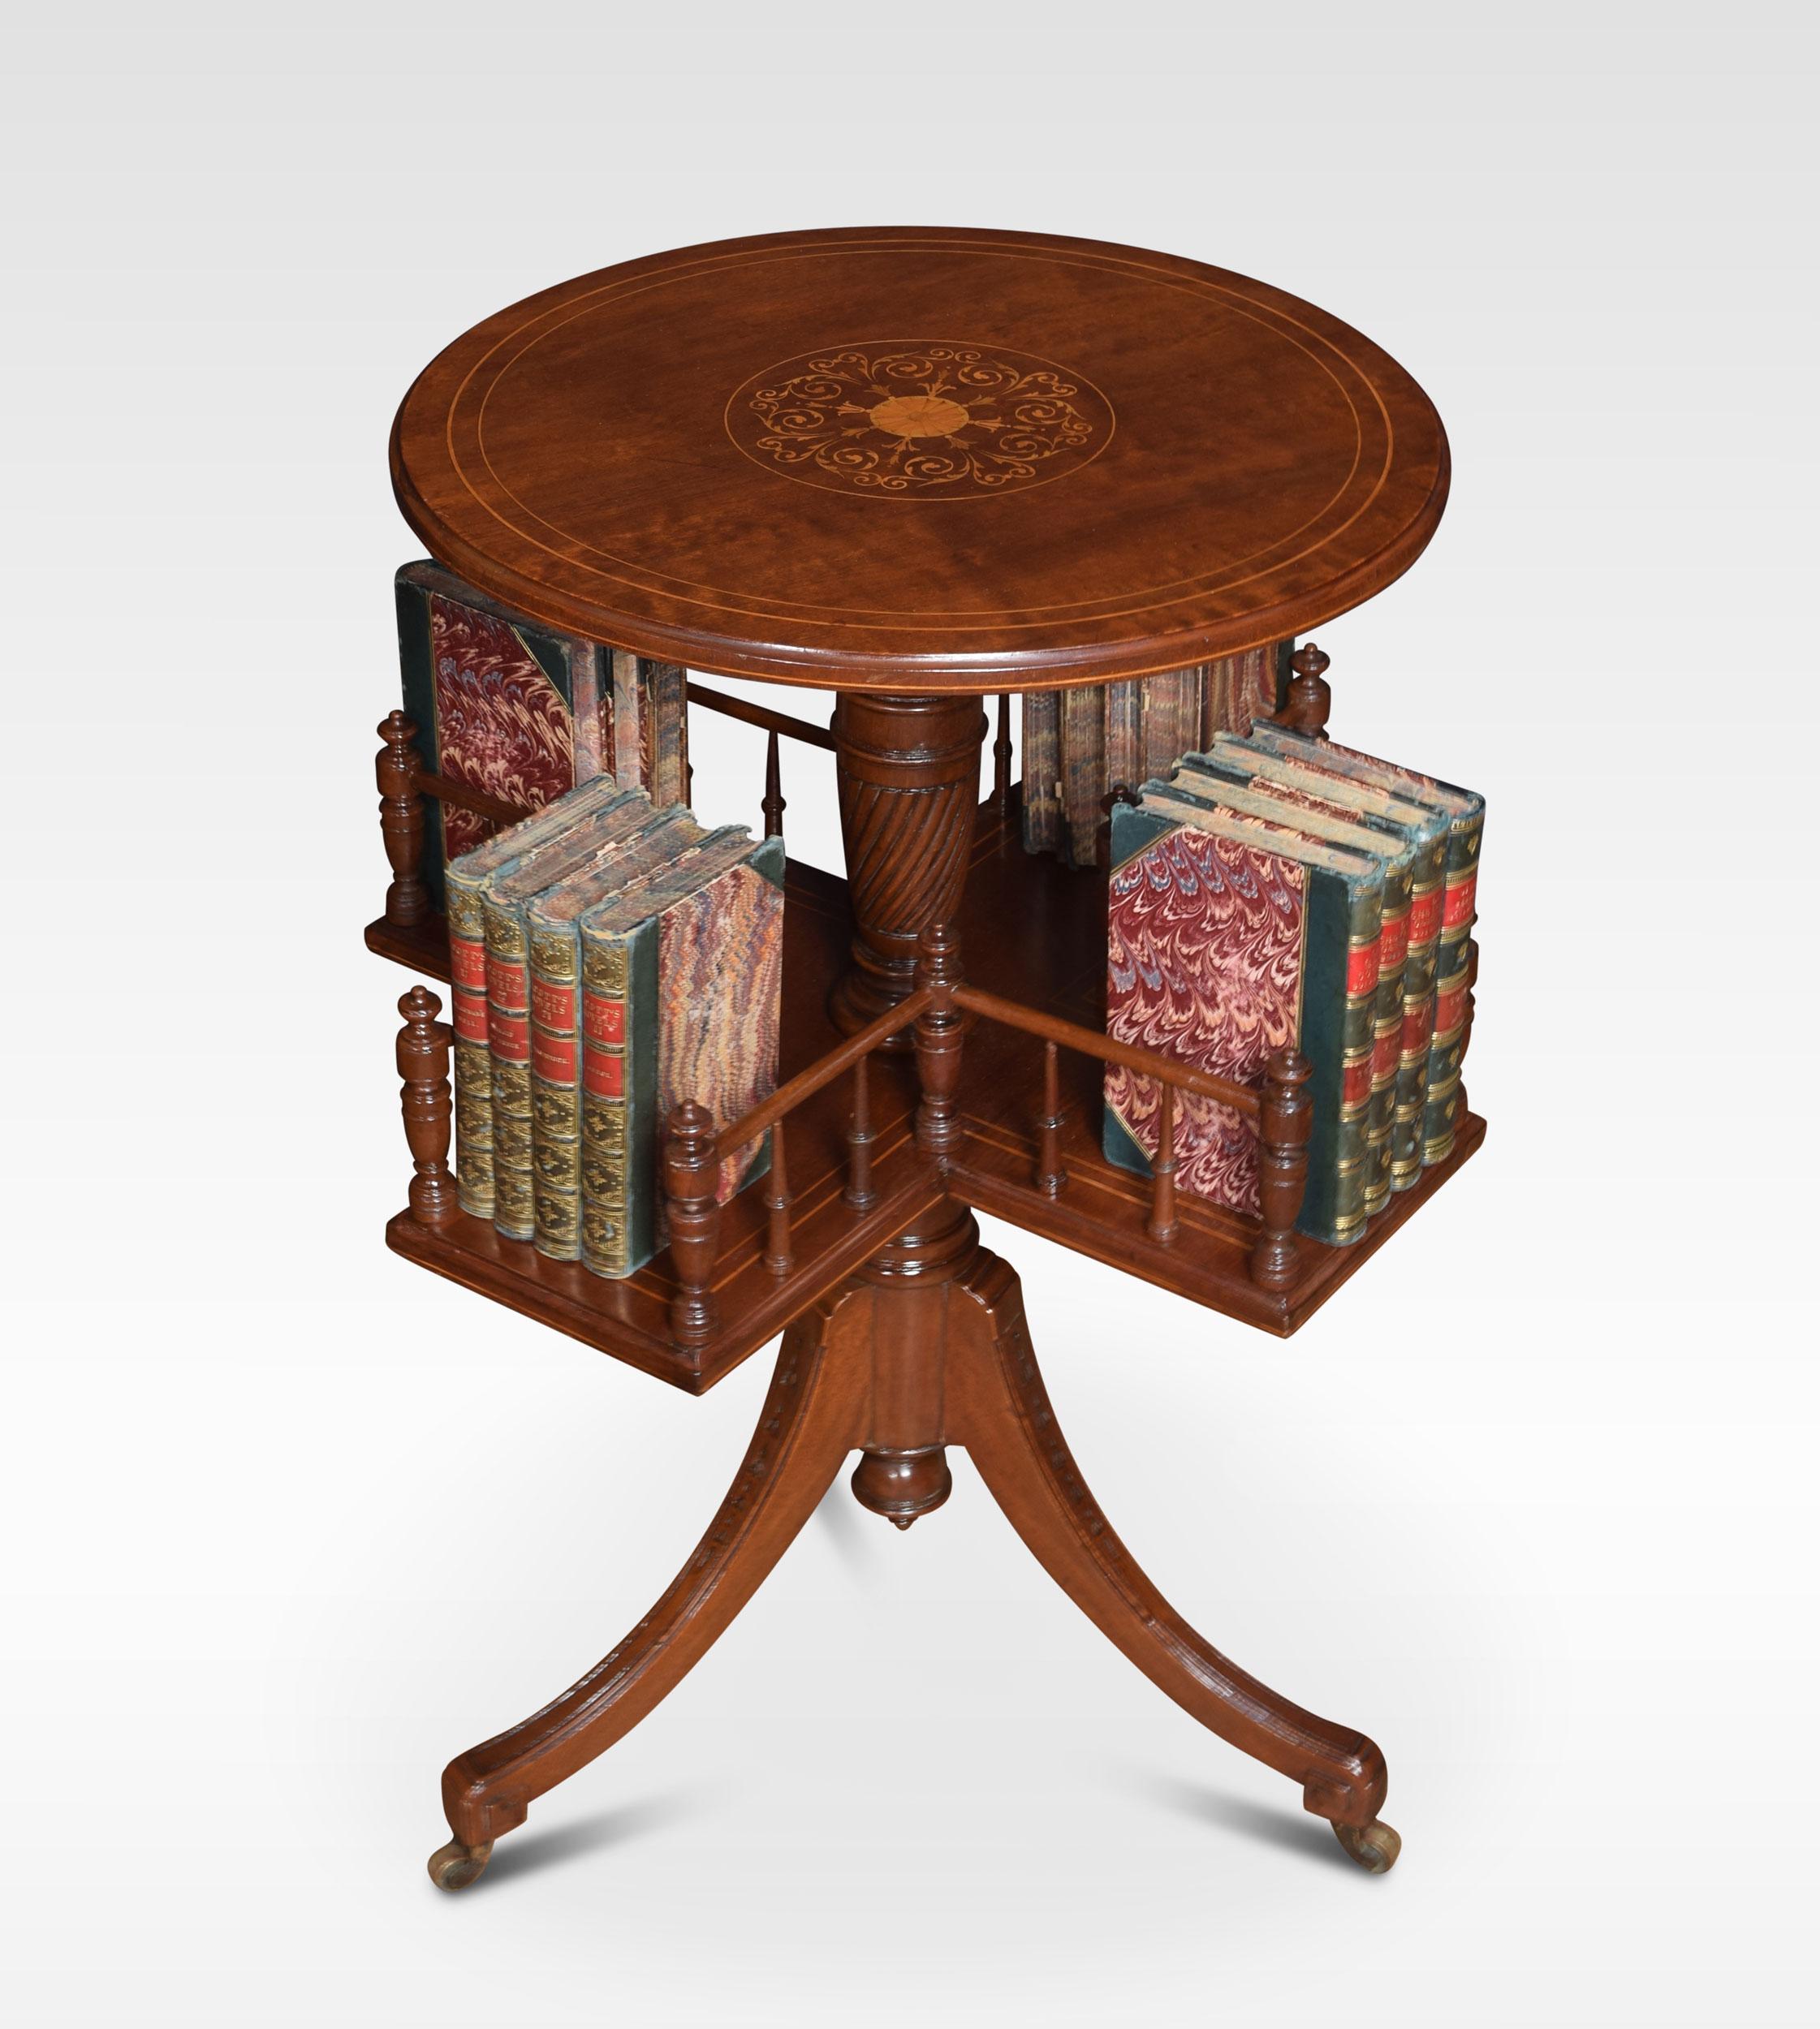 Regency style mahogany inlaid revolving book table the circular top with inlaid decoration. Raised up on spiral fluted support with revolving three-division bookshelf under tier All raised up on tripod base.
Dimensions
Height 28.5 inches
Width 21